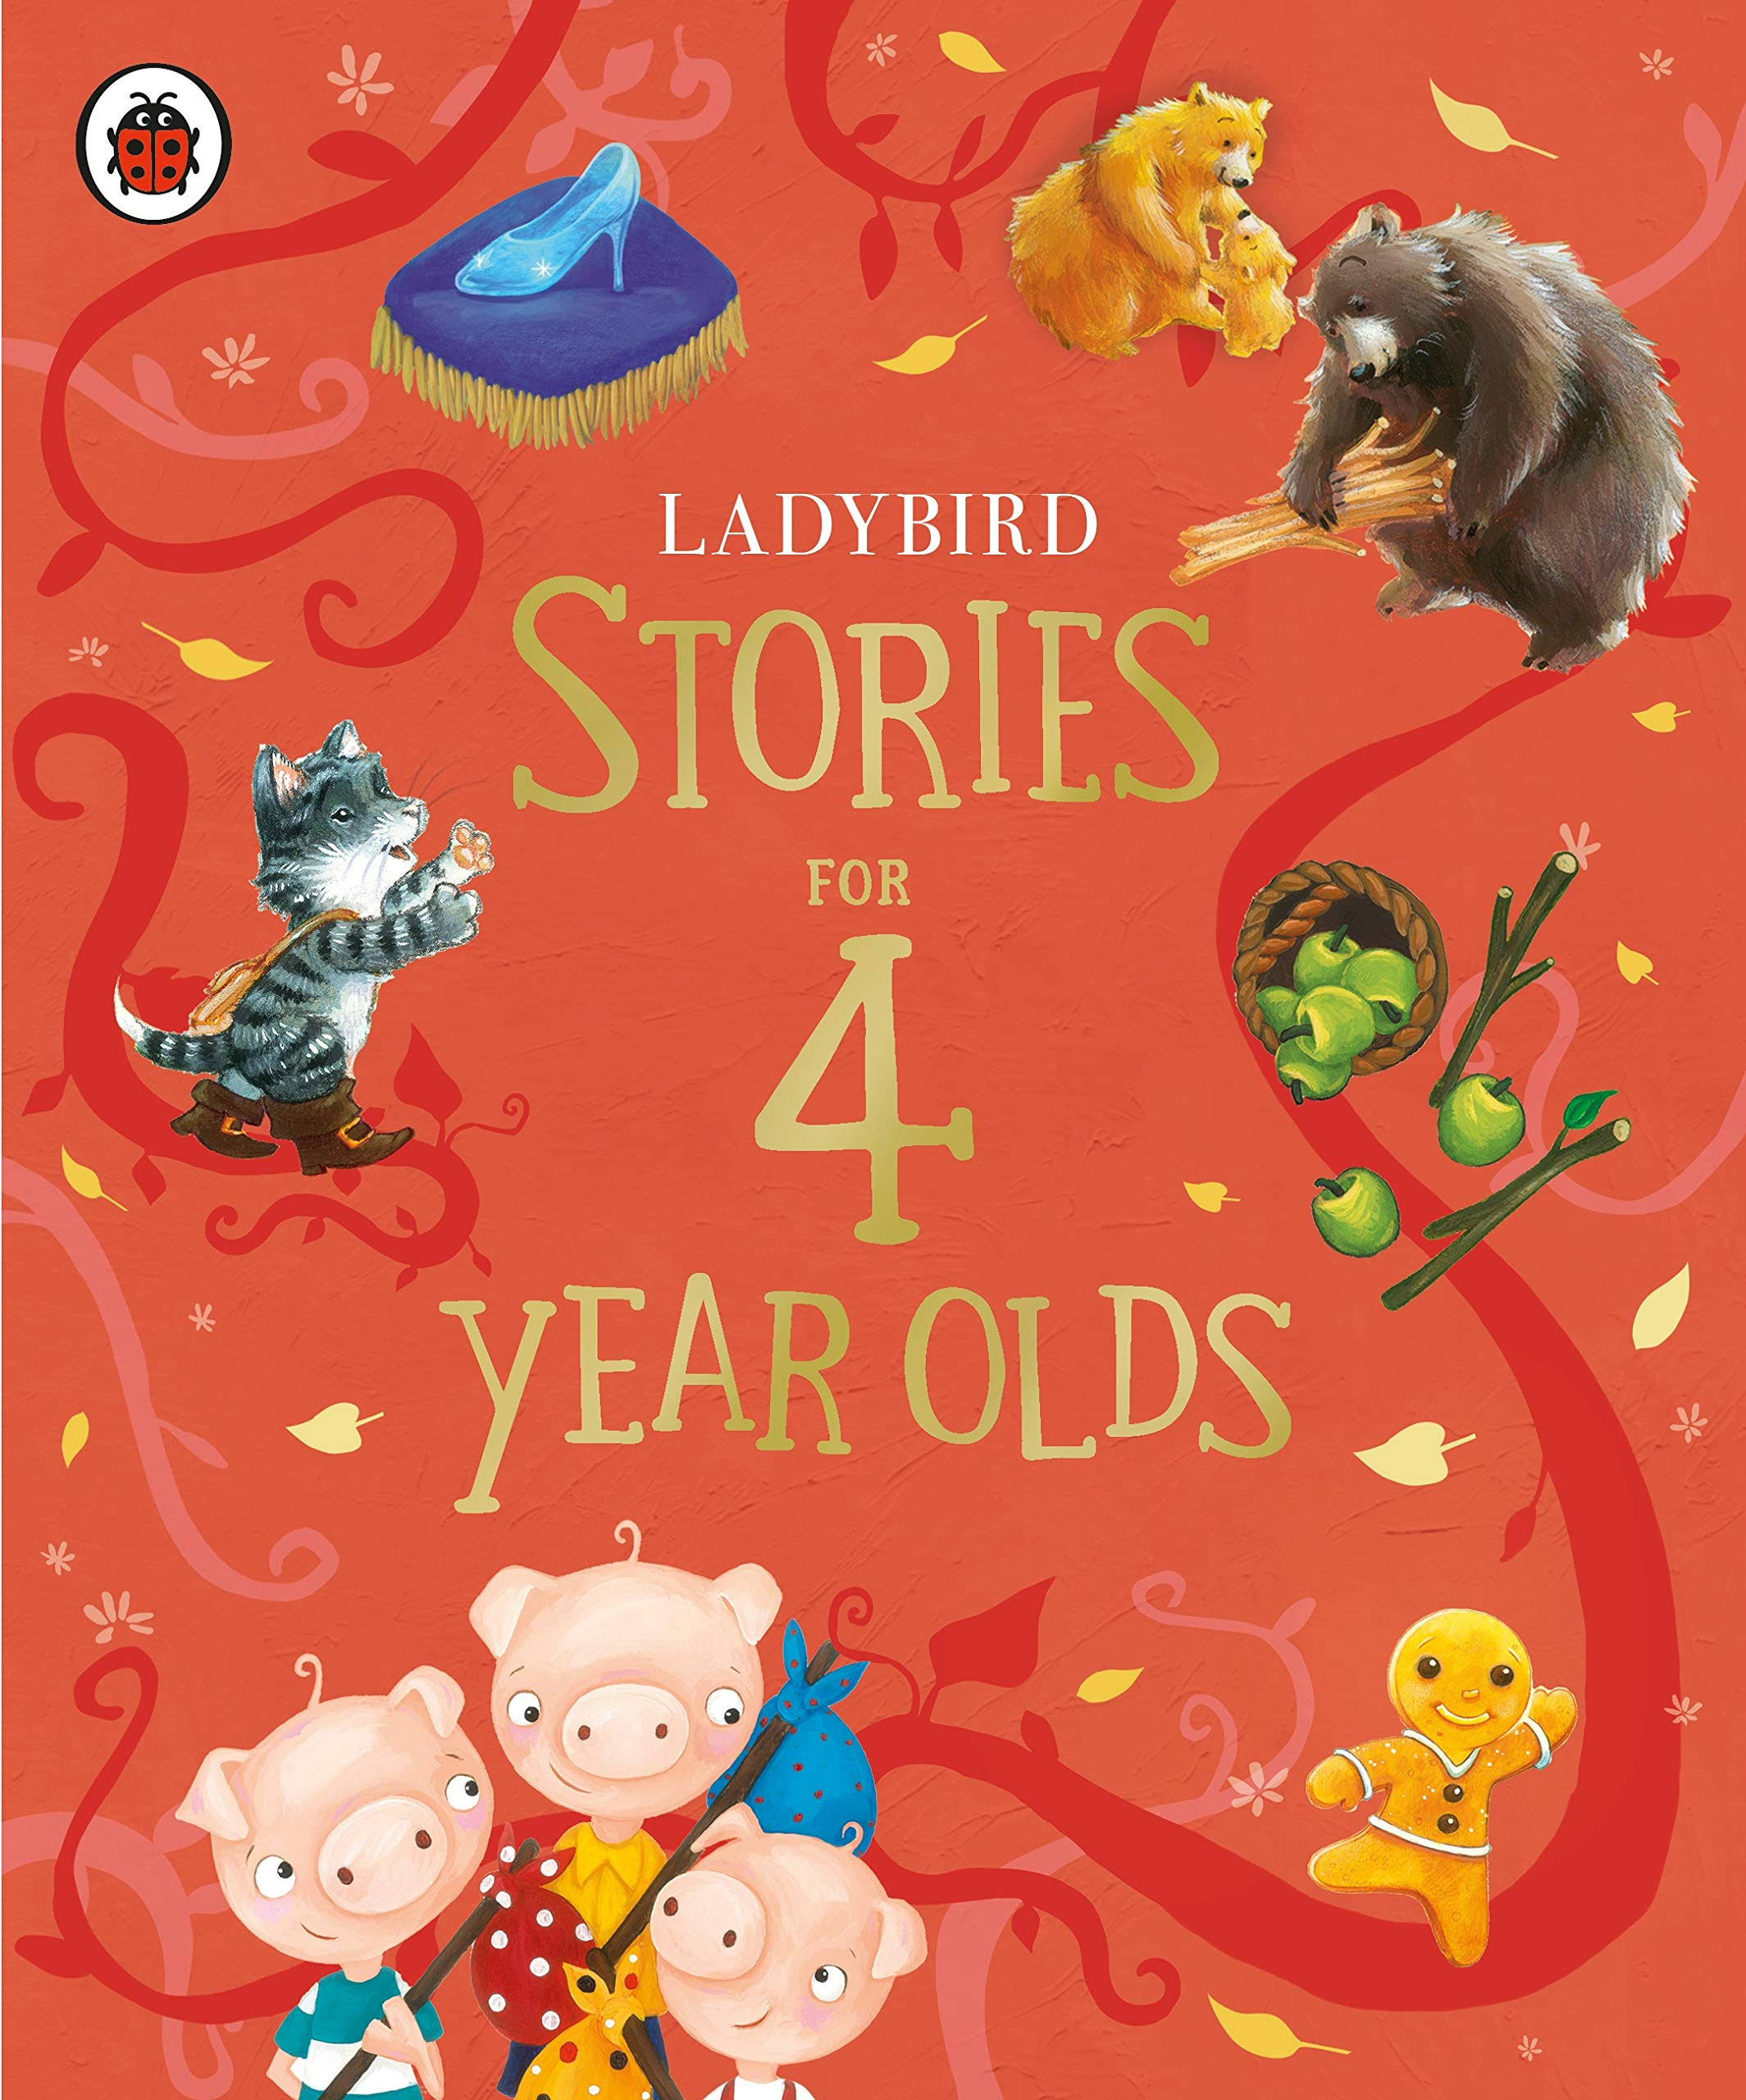 Ladybird Stories for Four Year Olds [Book]